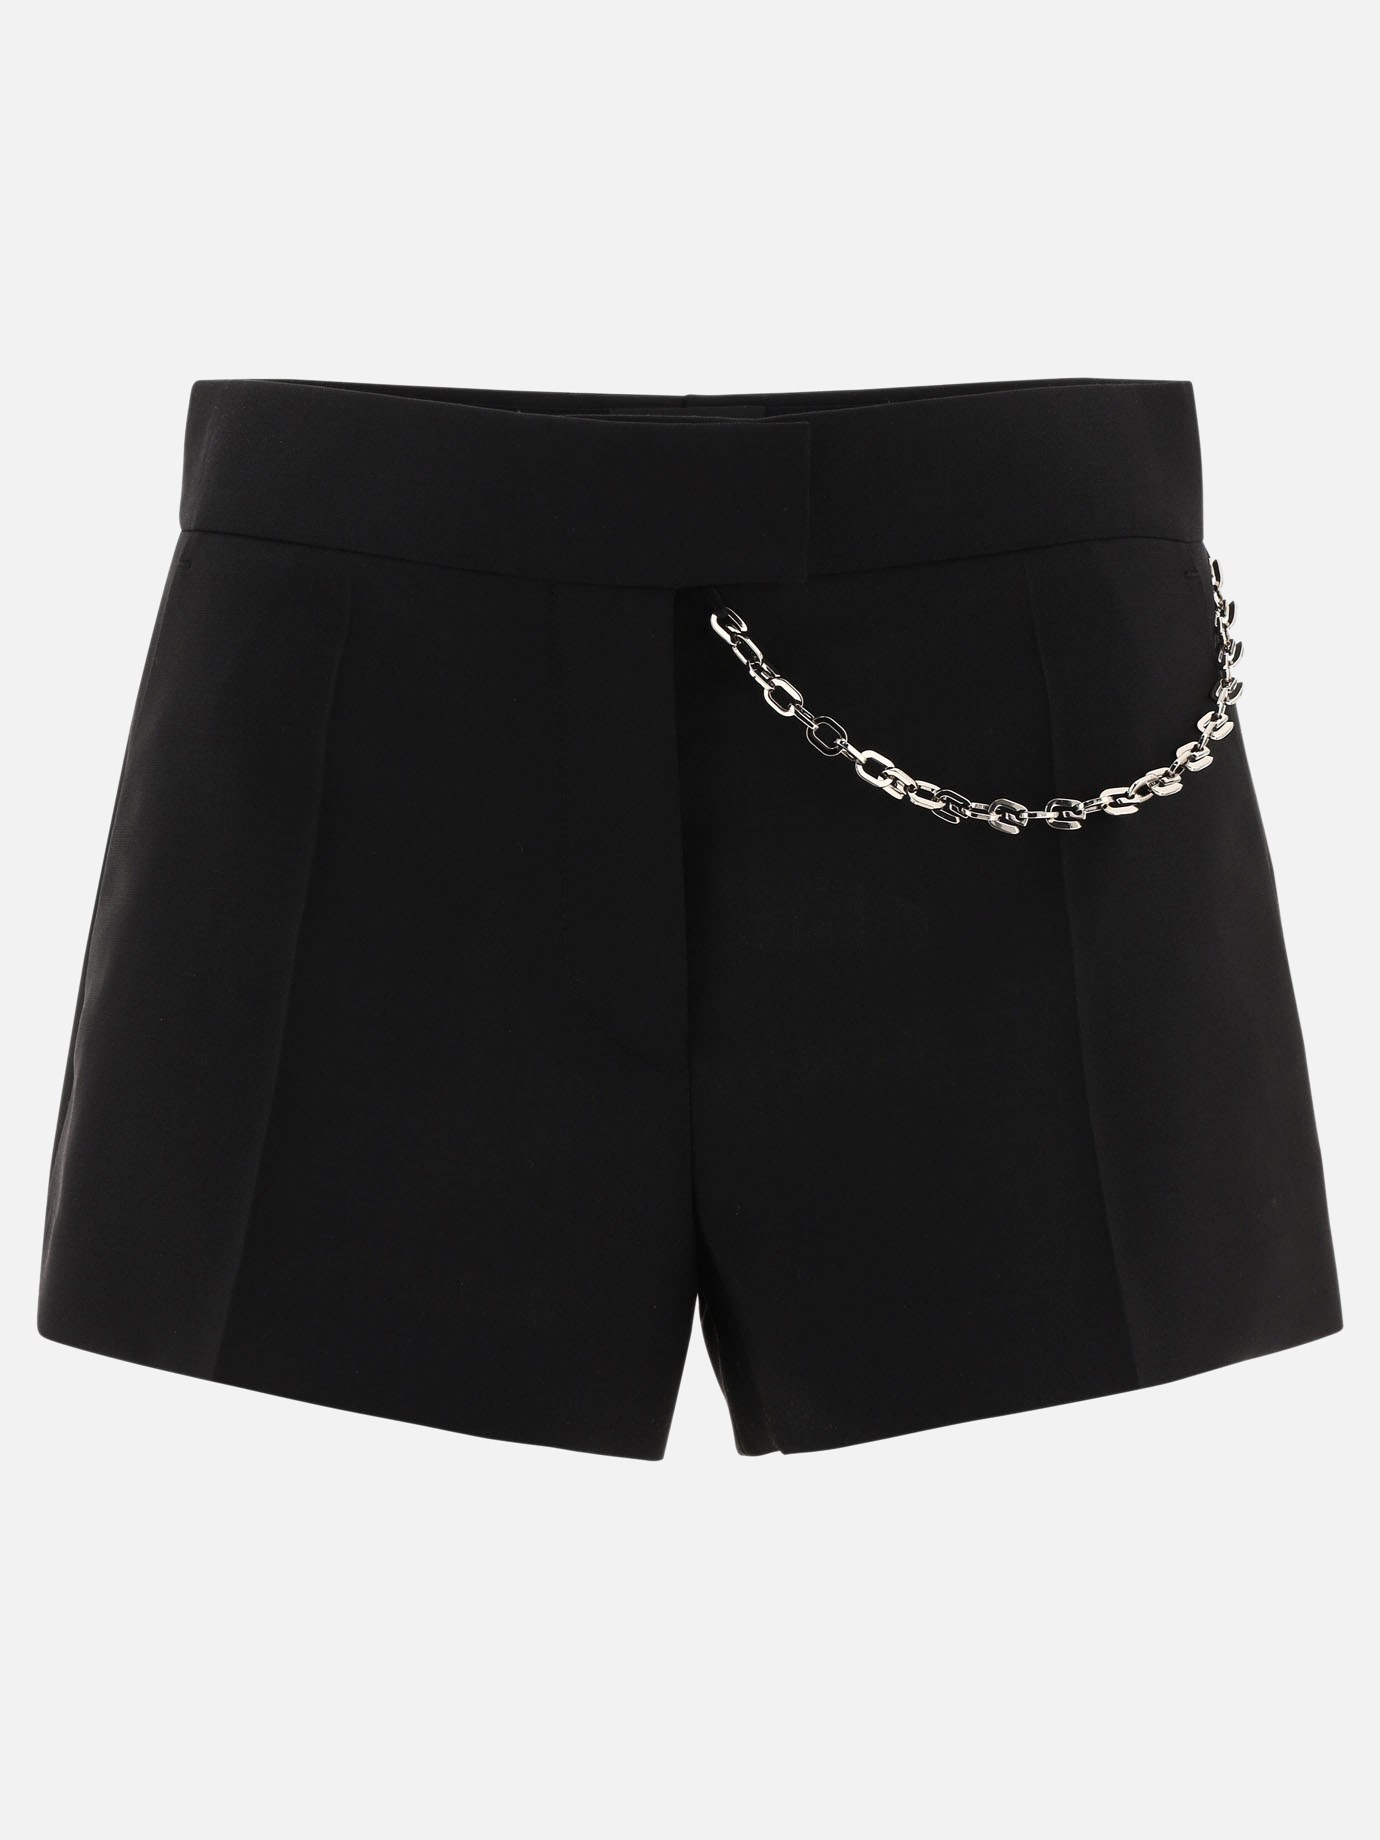 Short with chain